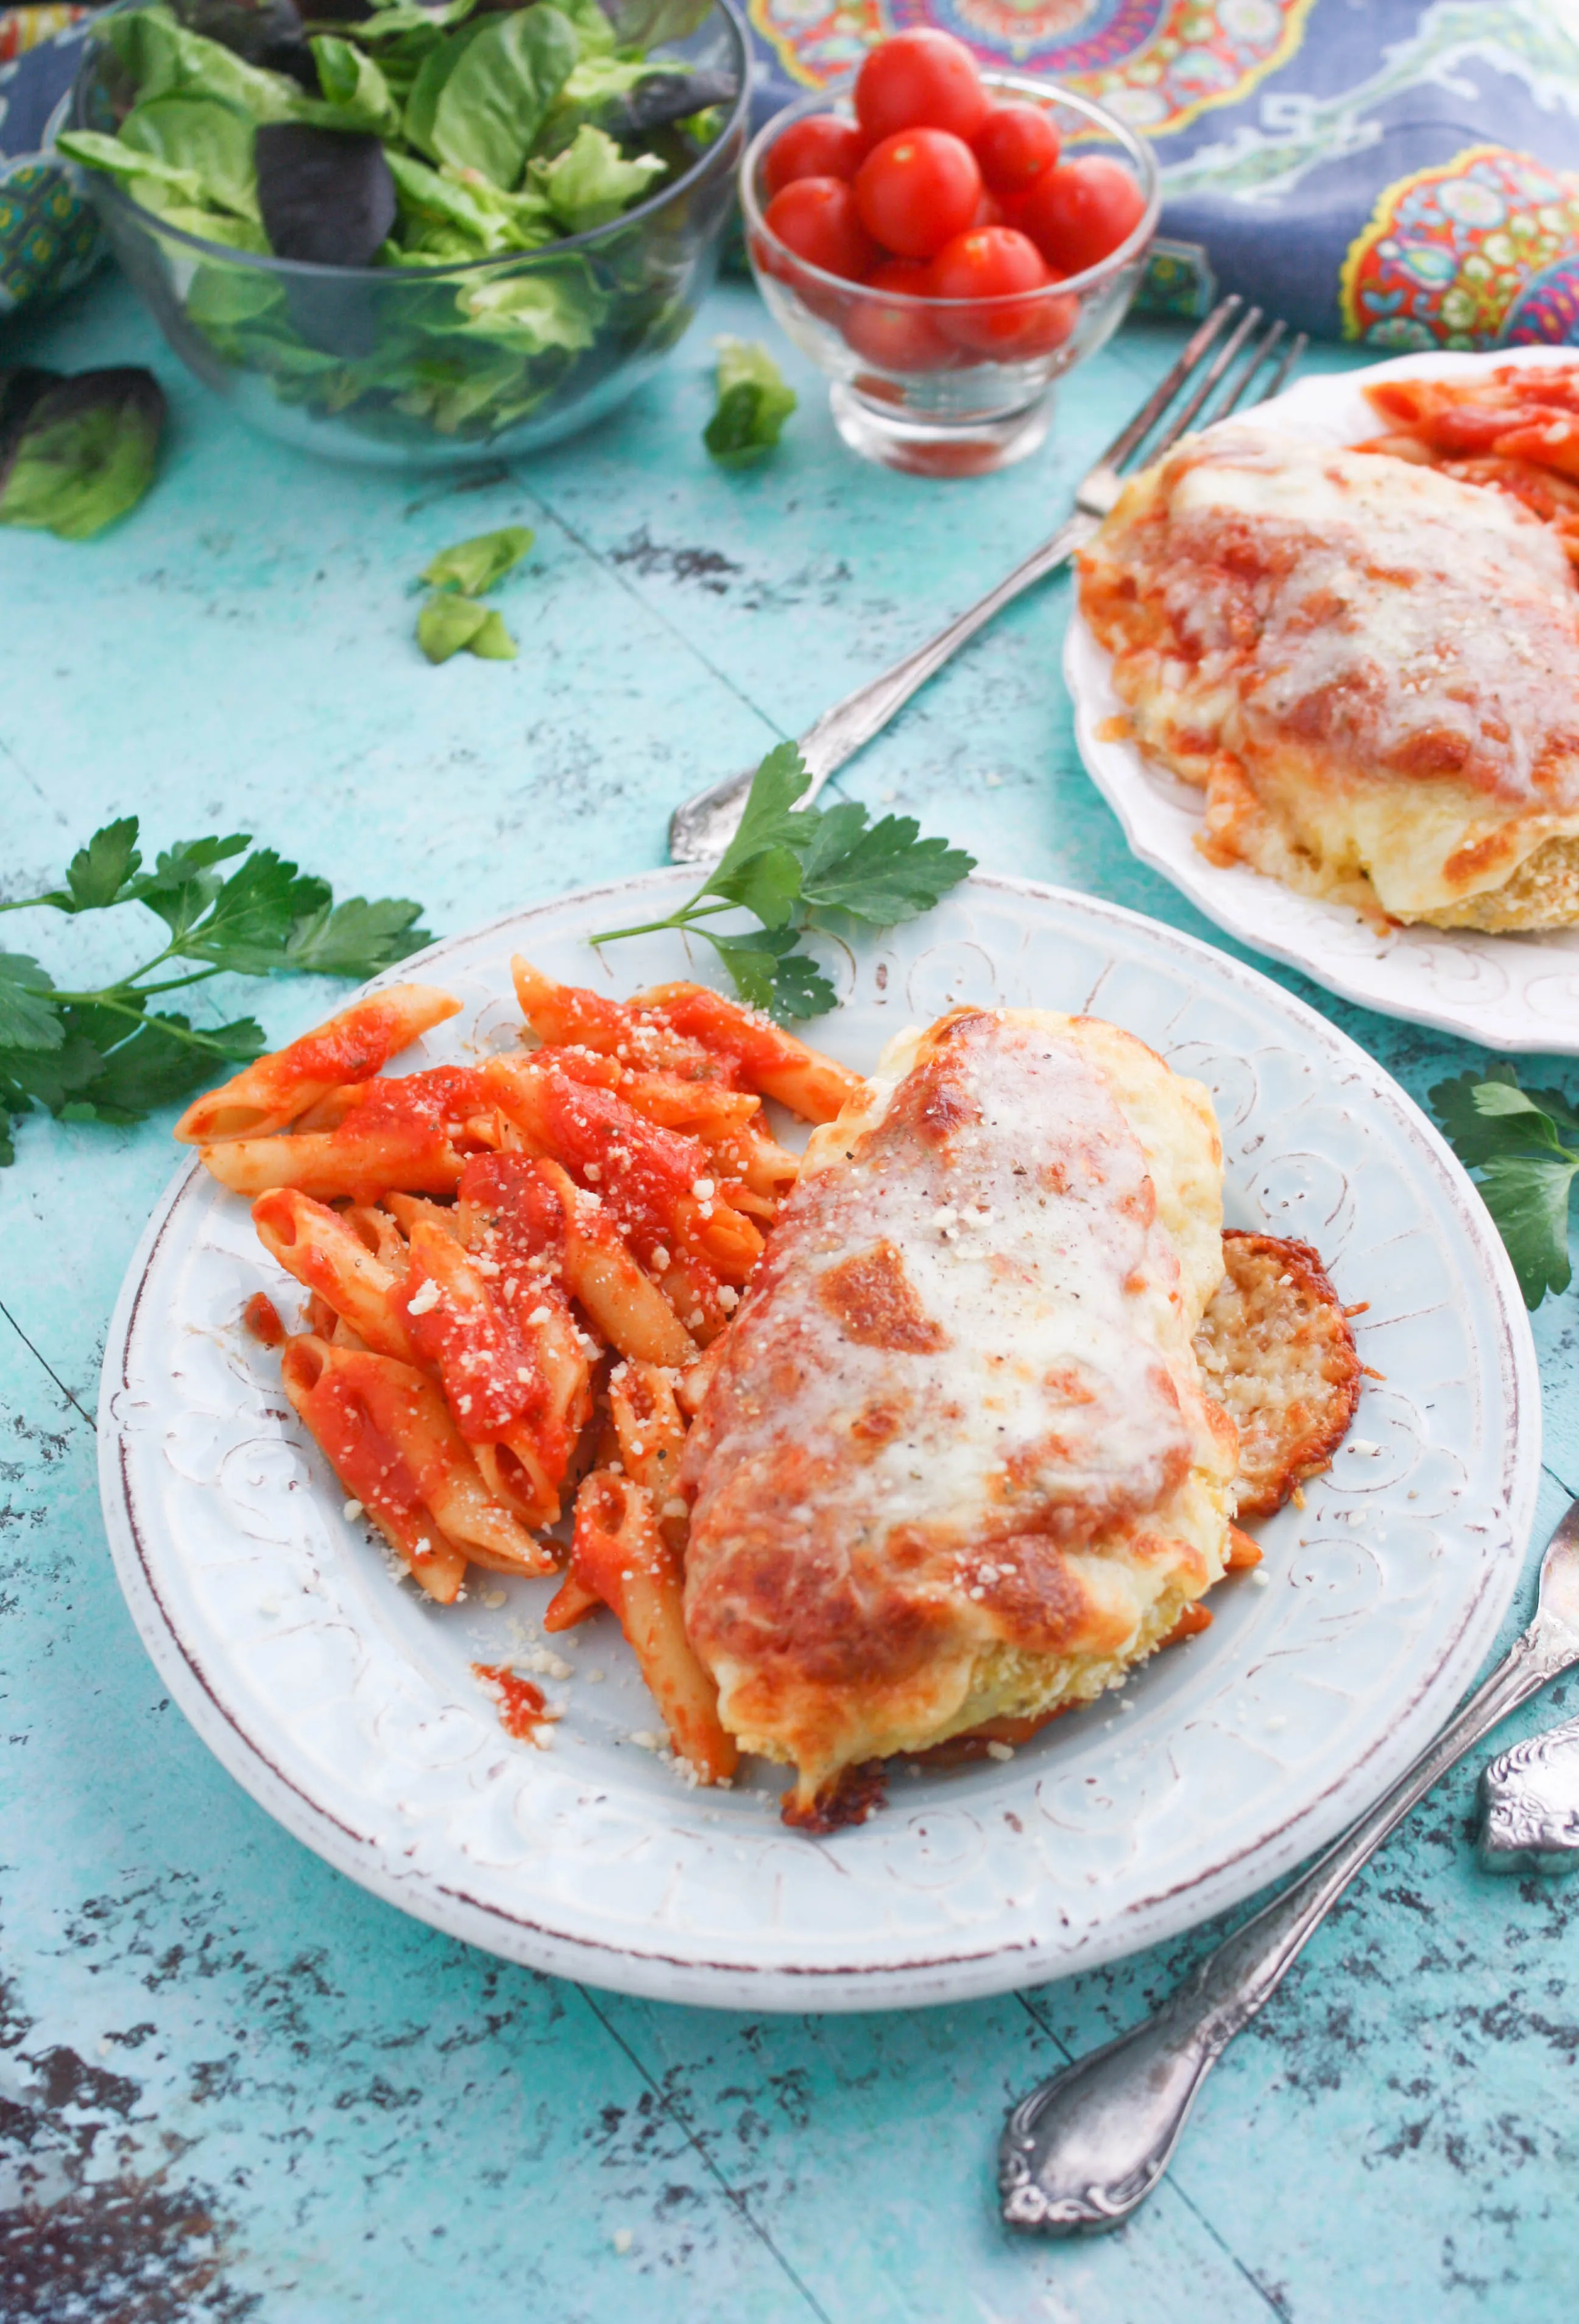 Classic Baked Chicken Parmesan is a great dish for any night. You'll love the goodness that is Classic Baked Chicken Parmesan!